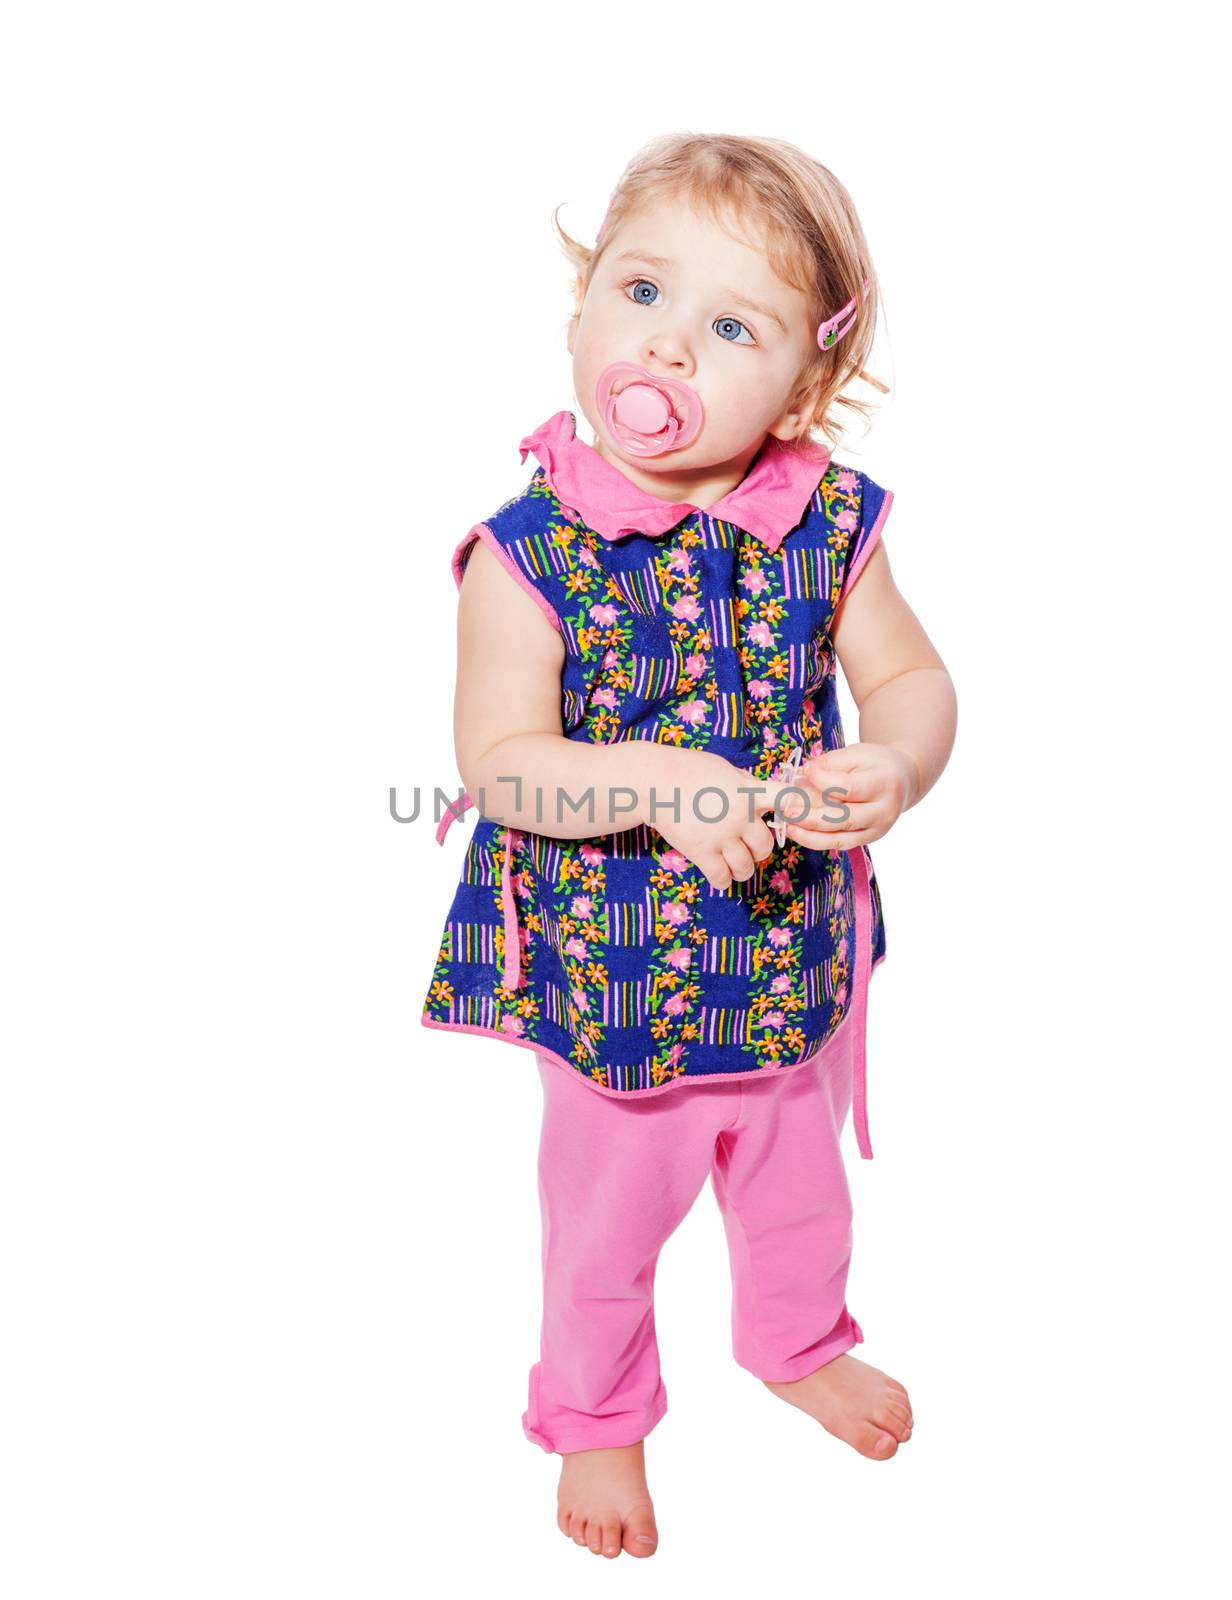 Little girl wearing pink clothes isolated on white